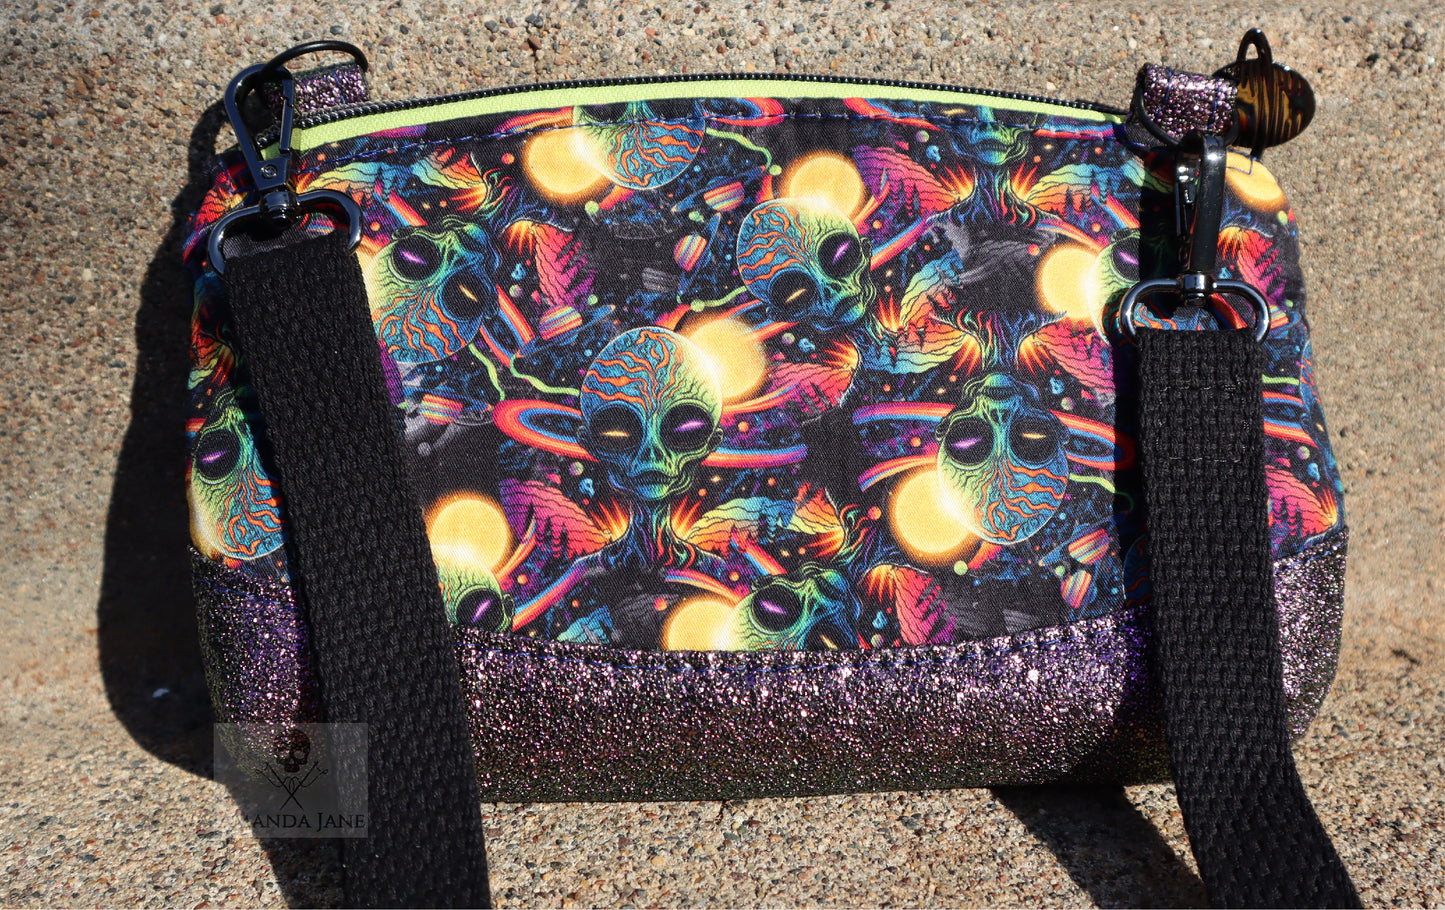 Handcrafted clutch or crossbody purse space aliens